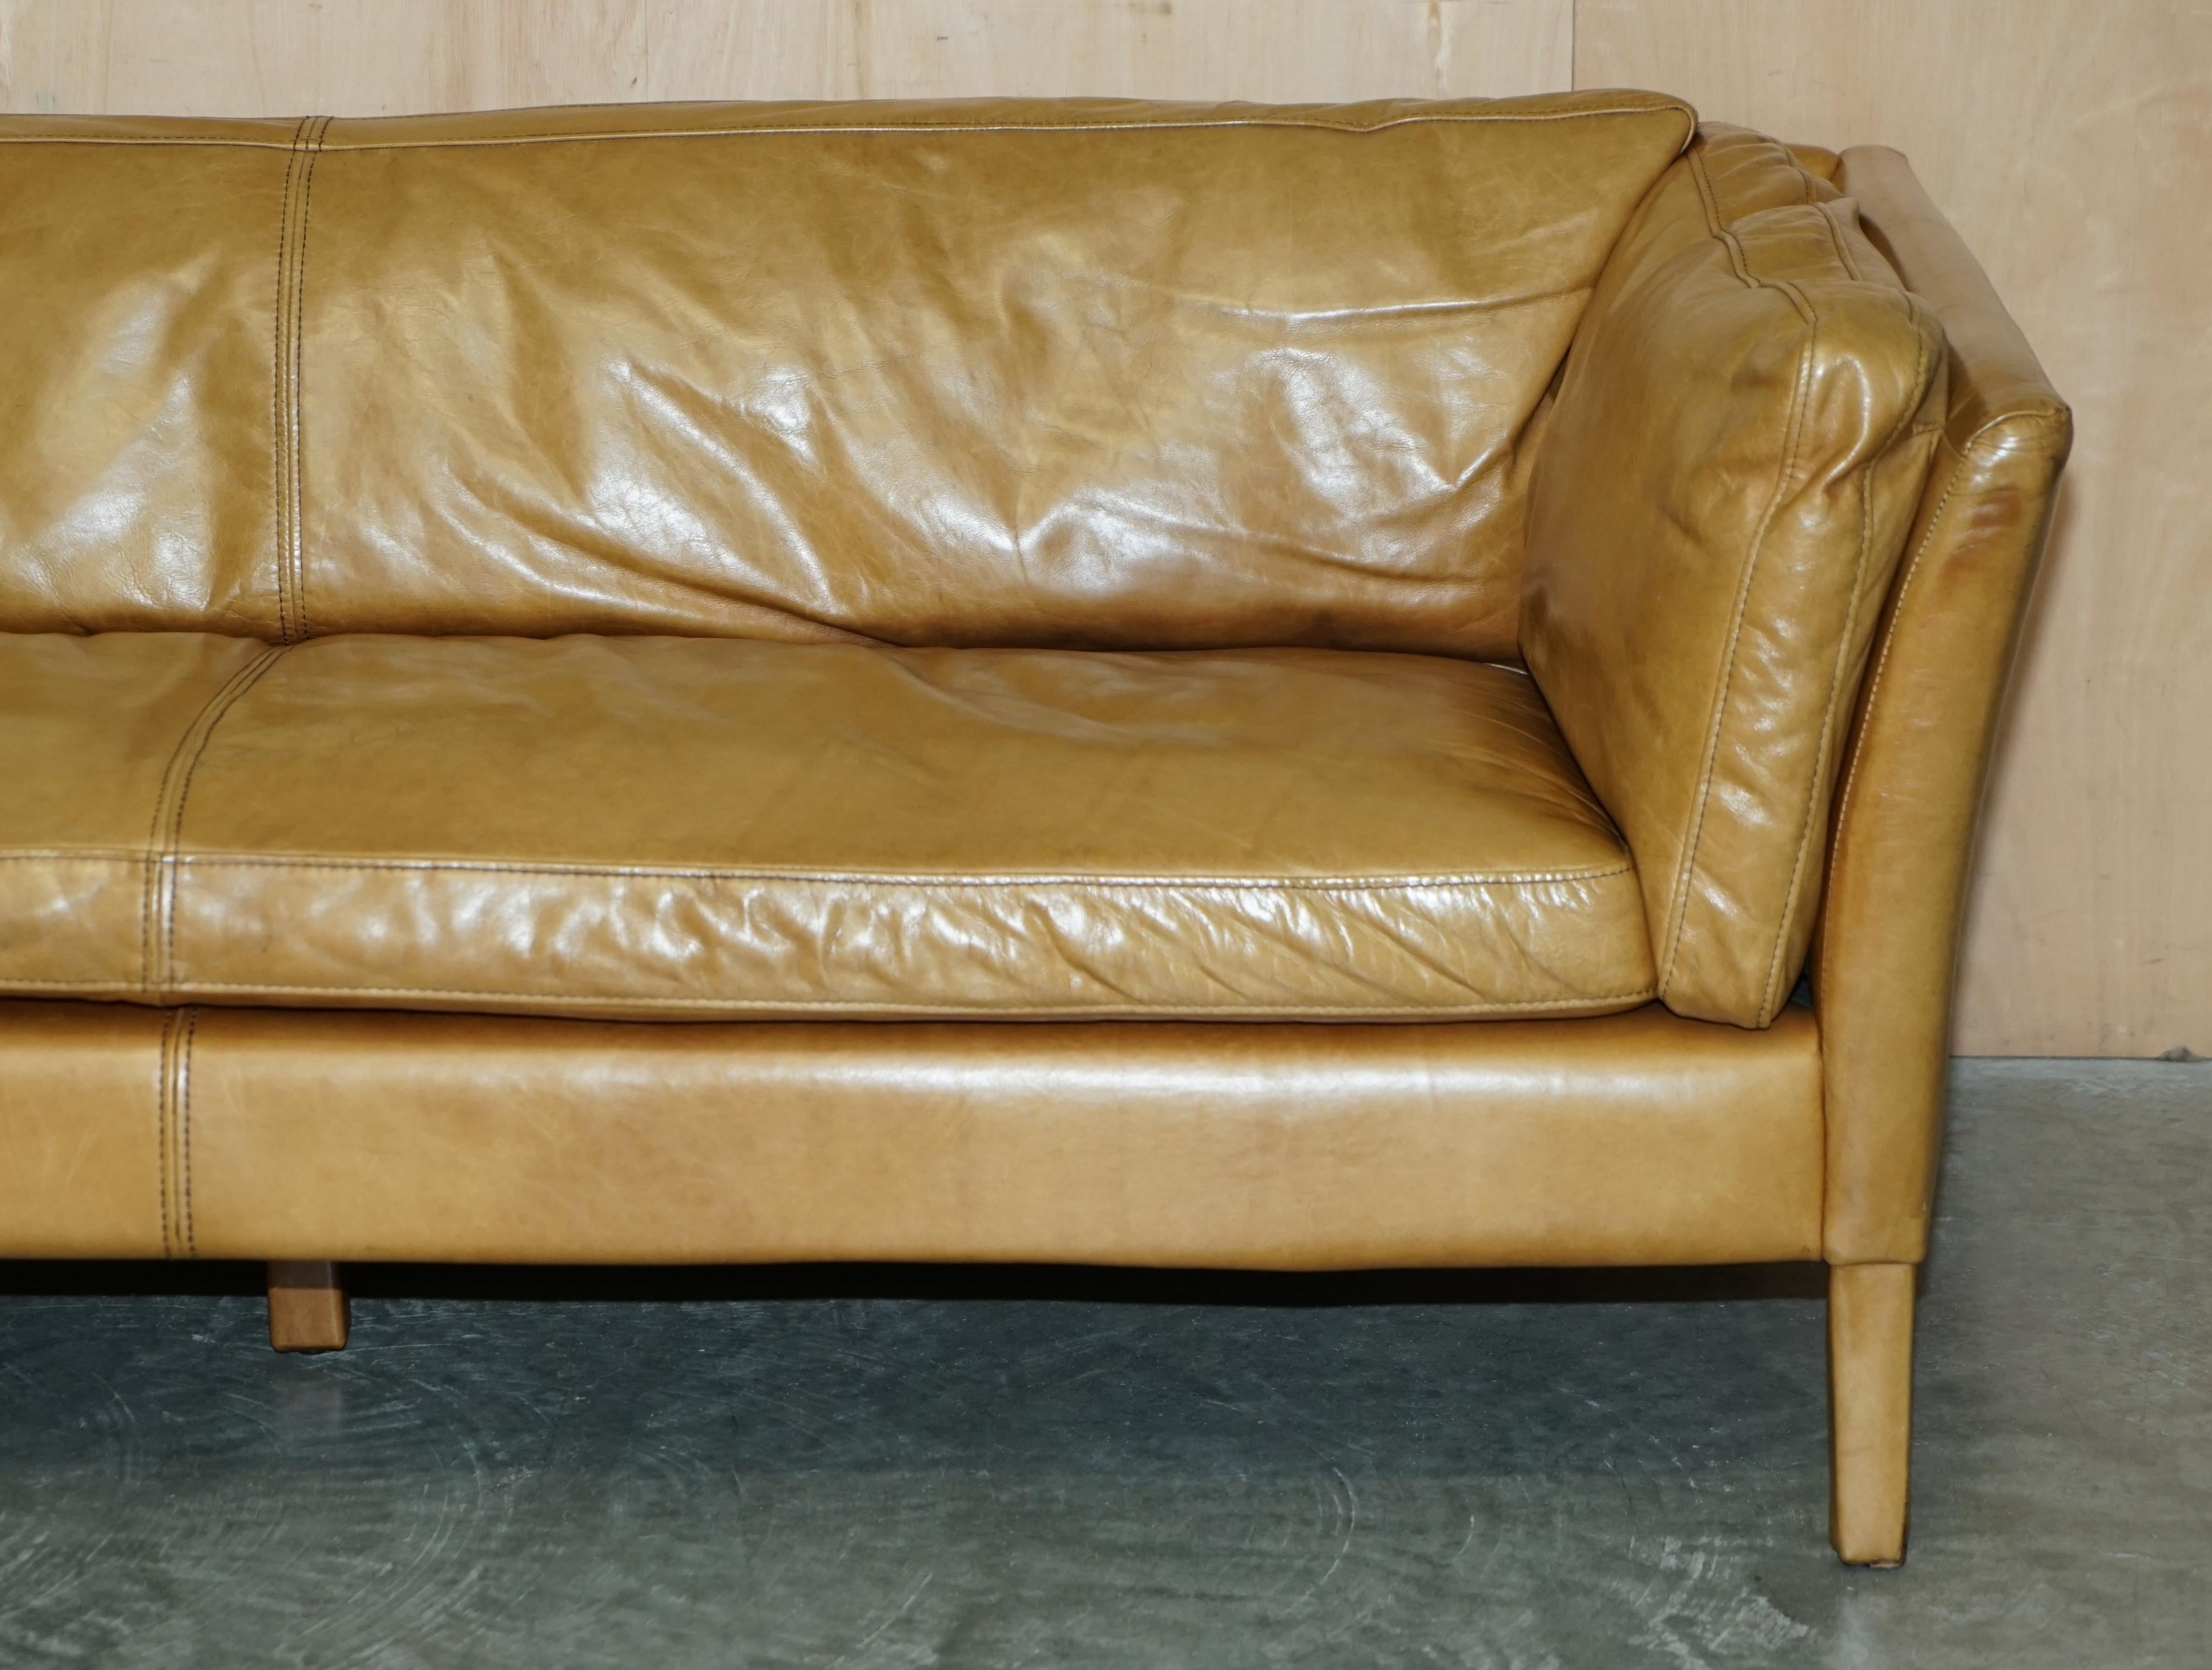 20th Century STYLiSH SUPER COMFORTABLE LARGE HALO GROUCHO TAN BROWN LEATHER THREE SEAT SOFA For Sale